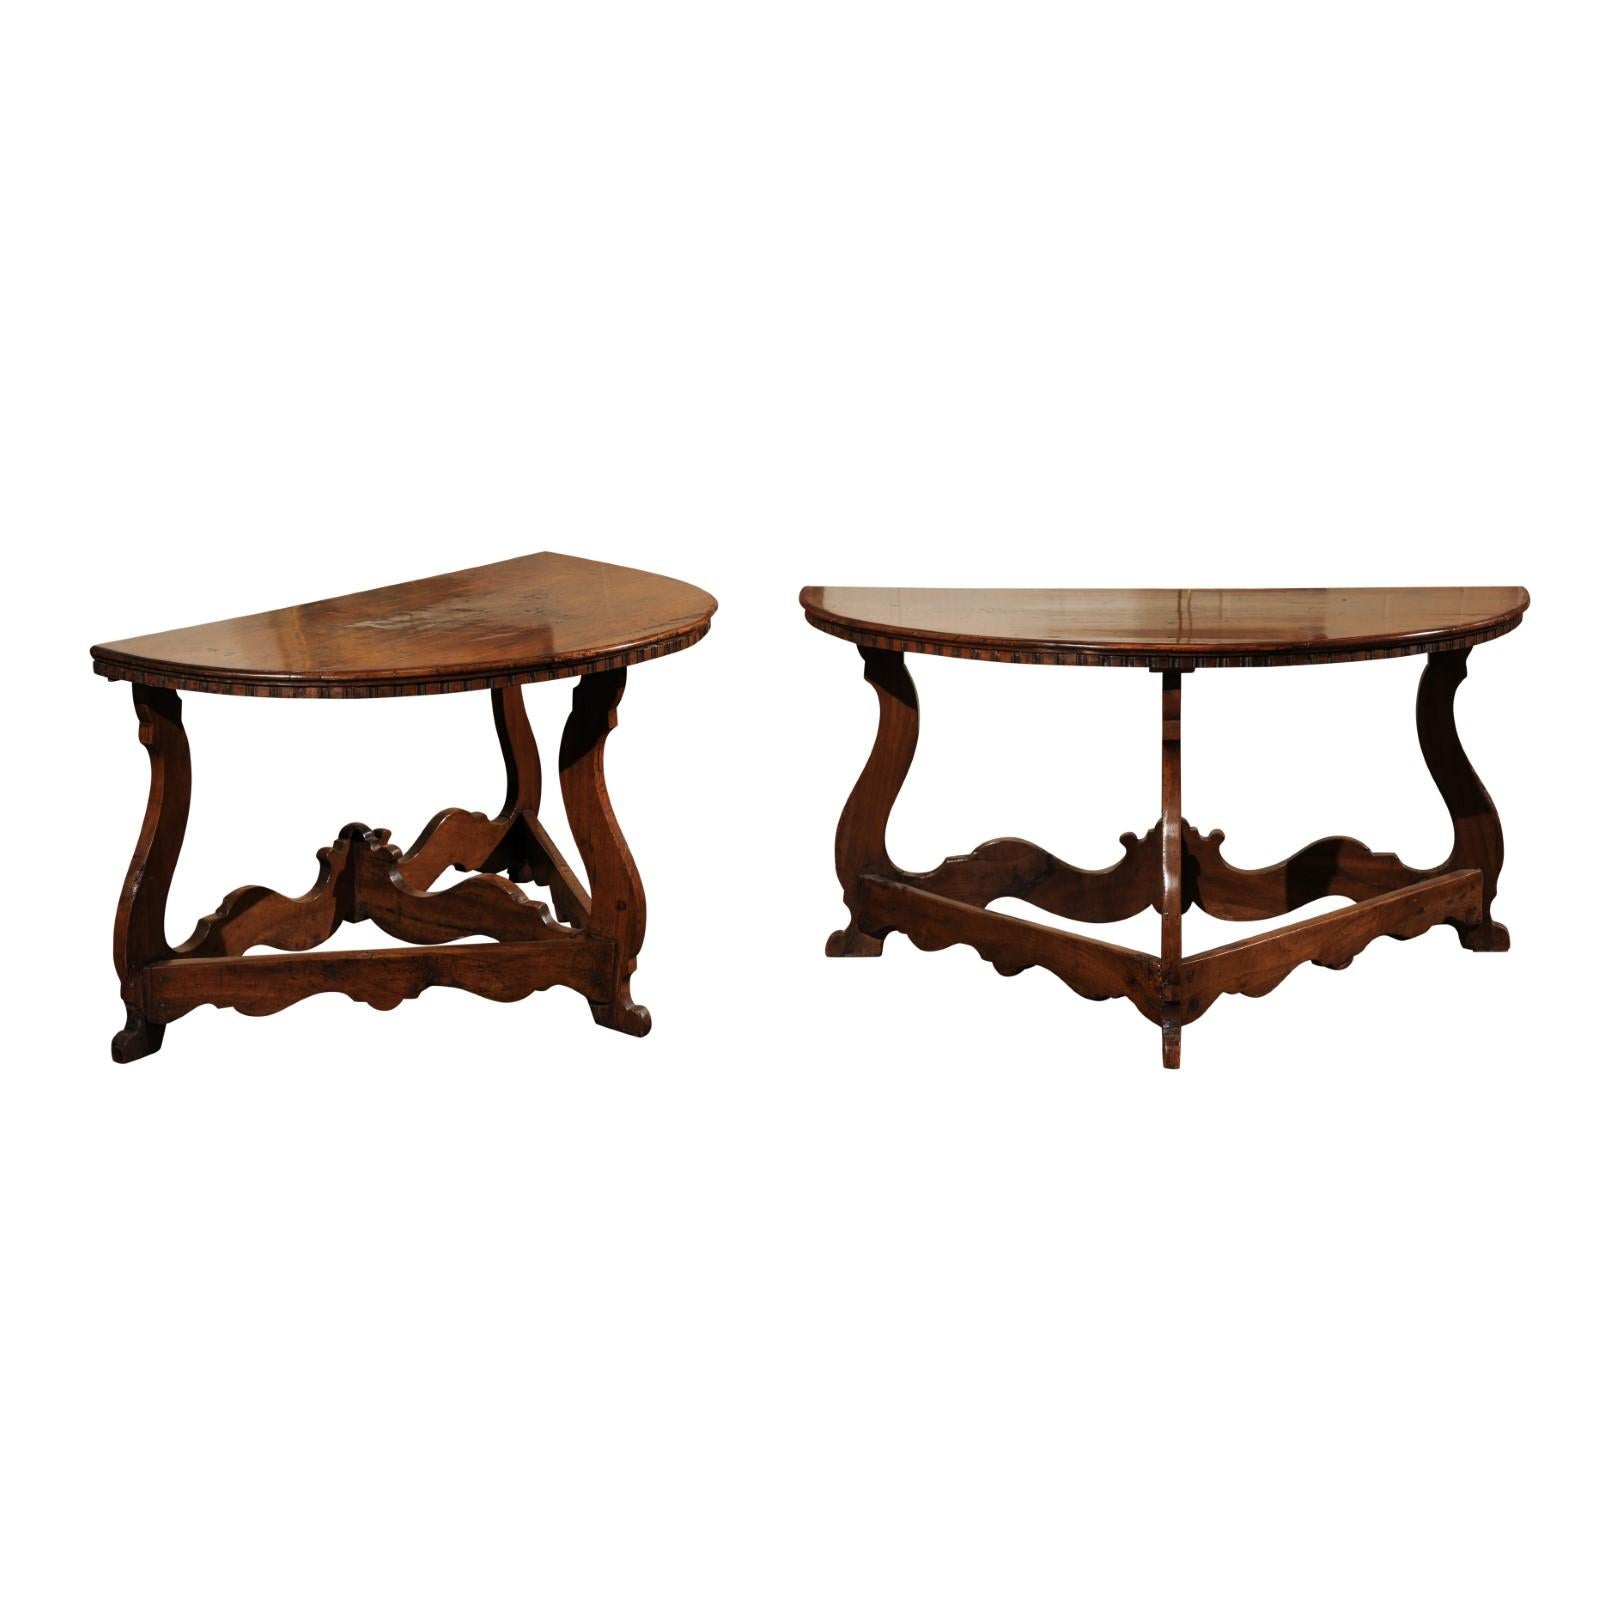 Pair of Italian Walnut Baroque Demi-lune Console Tables, Early 18th Century